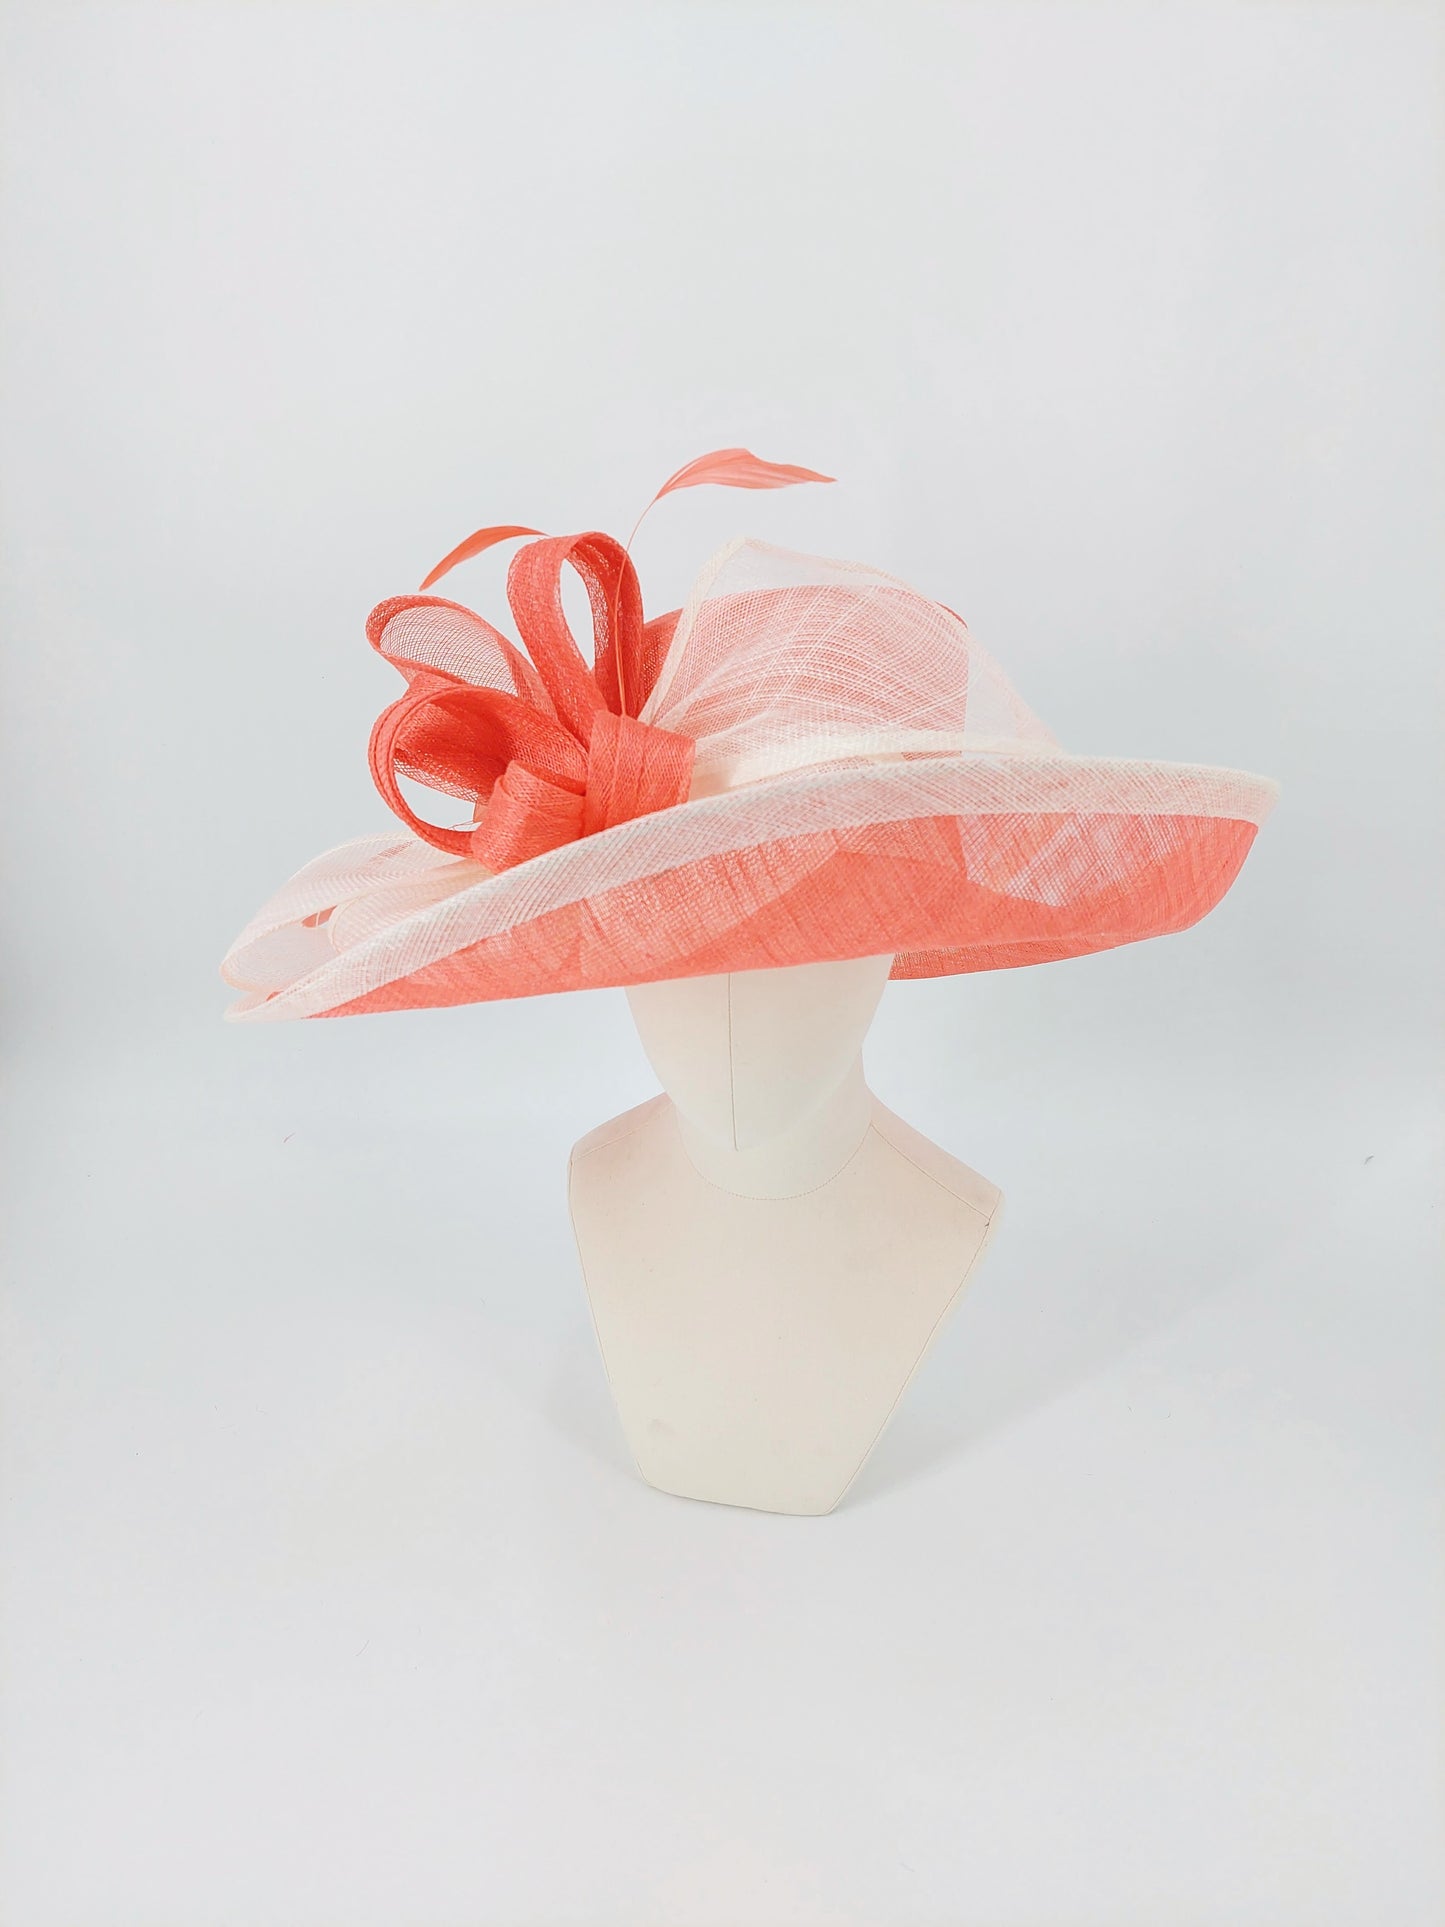 Hat Haven Millinery - custom Kentucky Derby hats and fascinators. Hand made hats in Louisville, Kentucky. Milliner in Louisville. Custom hat maker.